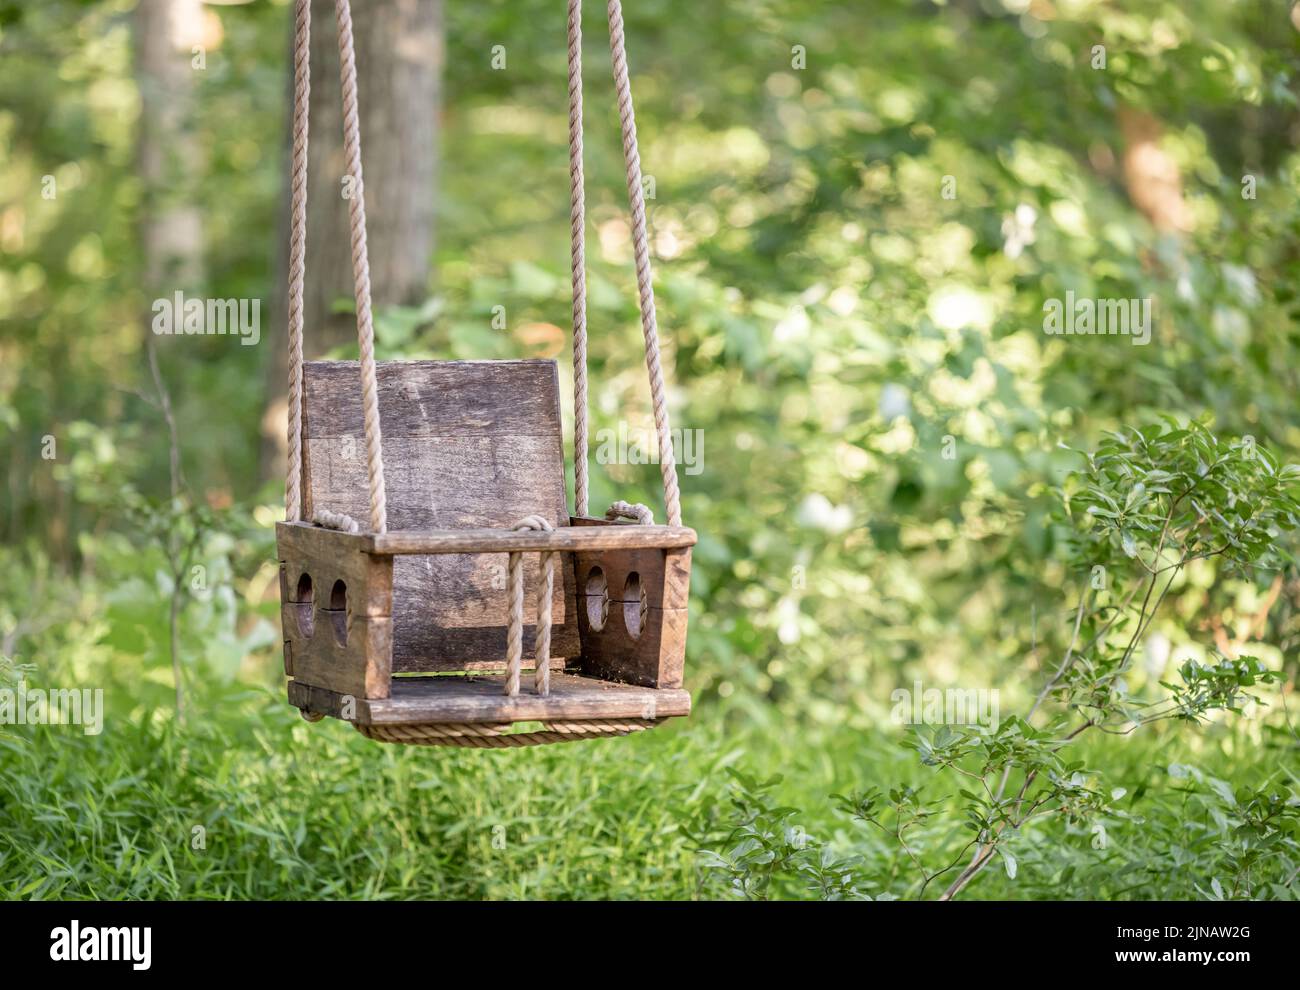 Old Wooden and rope chair swing Stock Photo